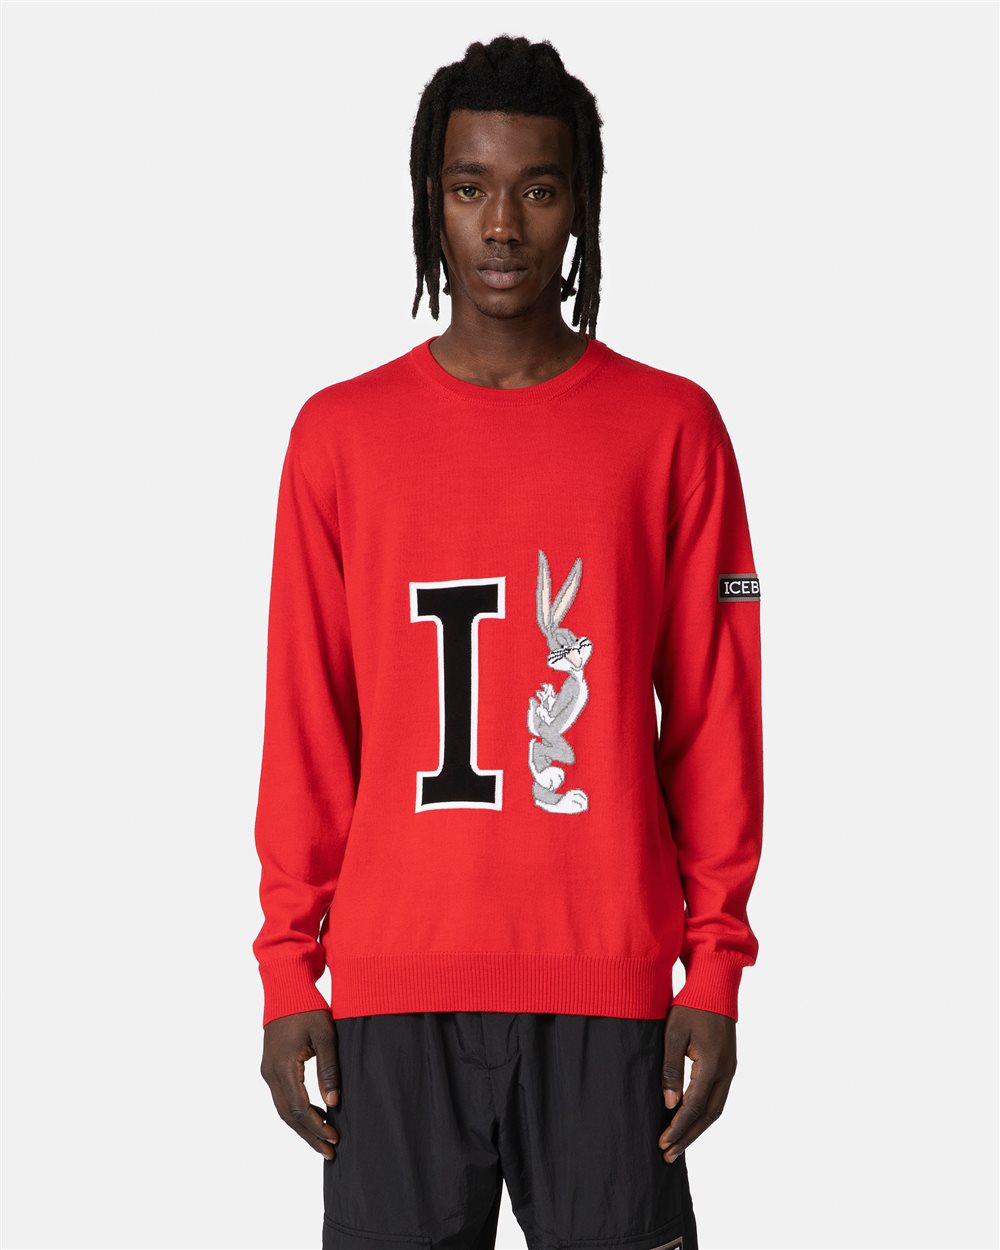 Red sweater with cartoon detail - Iceberg - Official Website